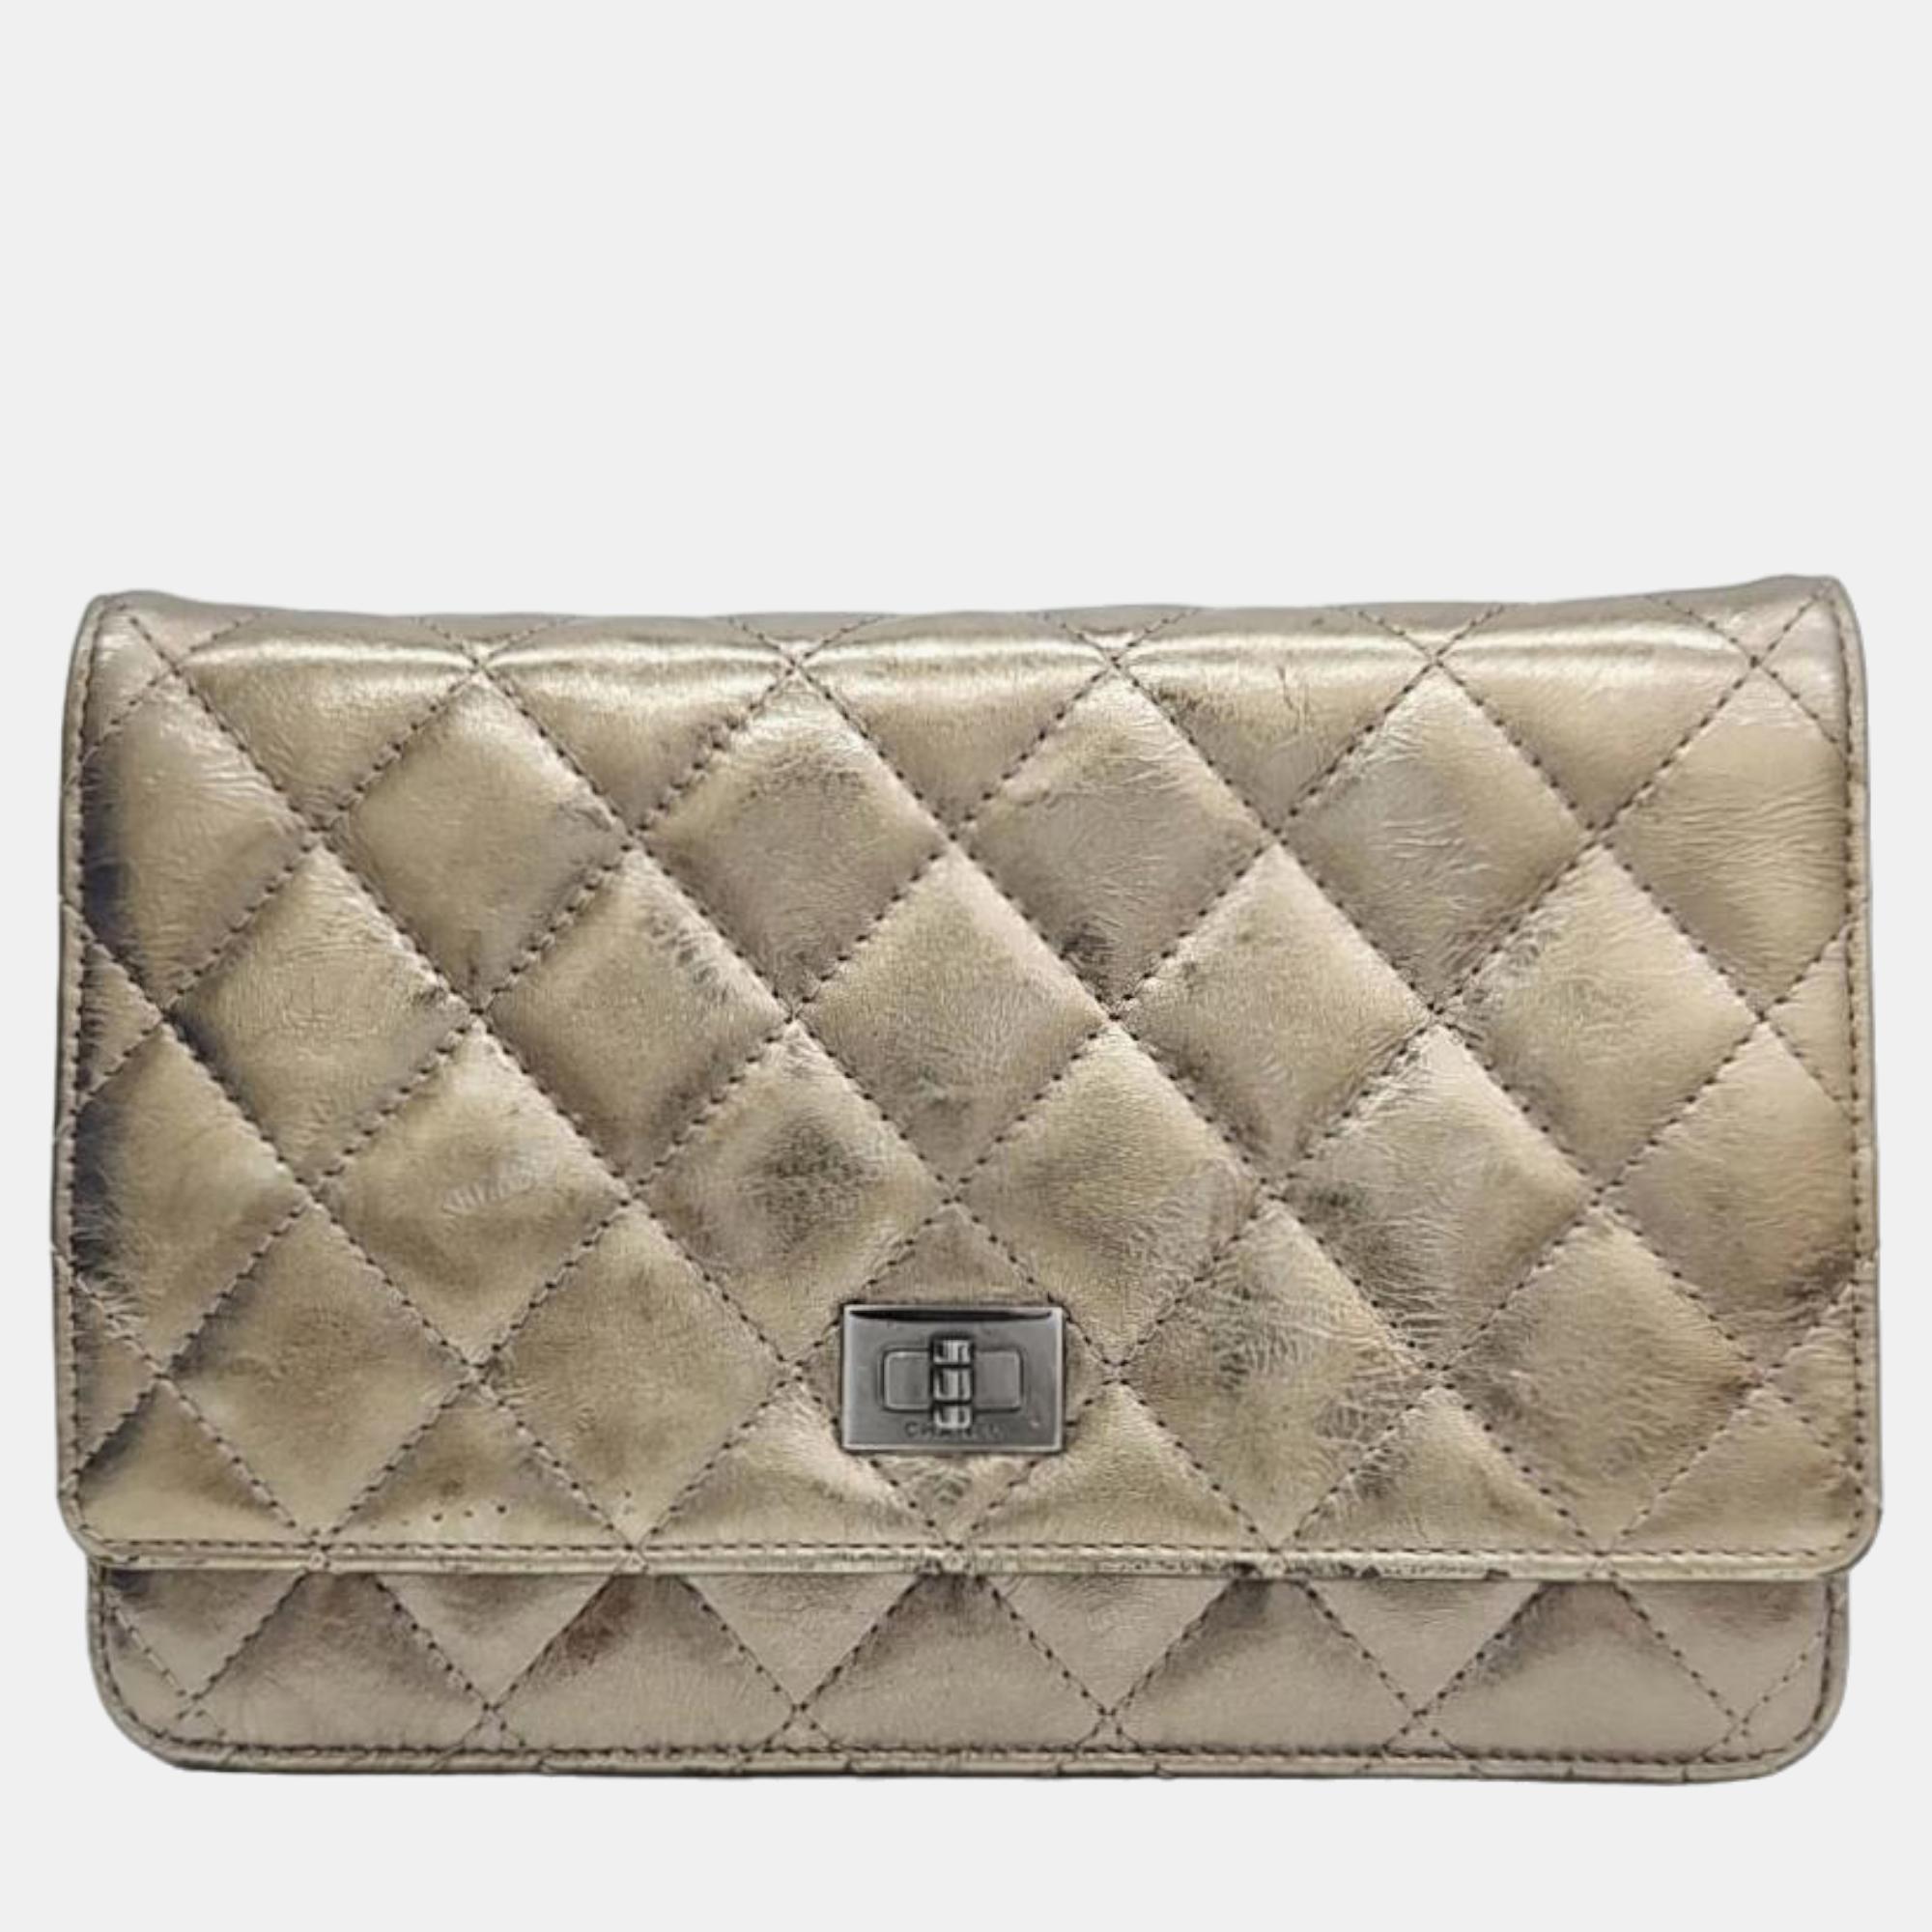 Chanel grey leather reissue wallet on chain